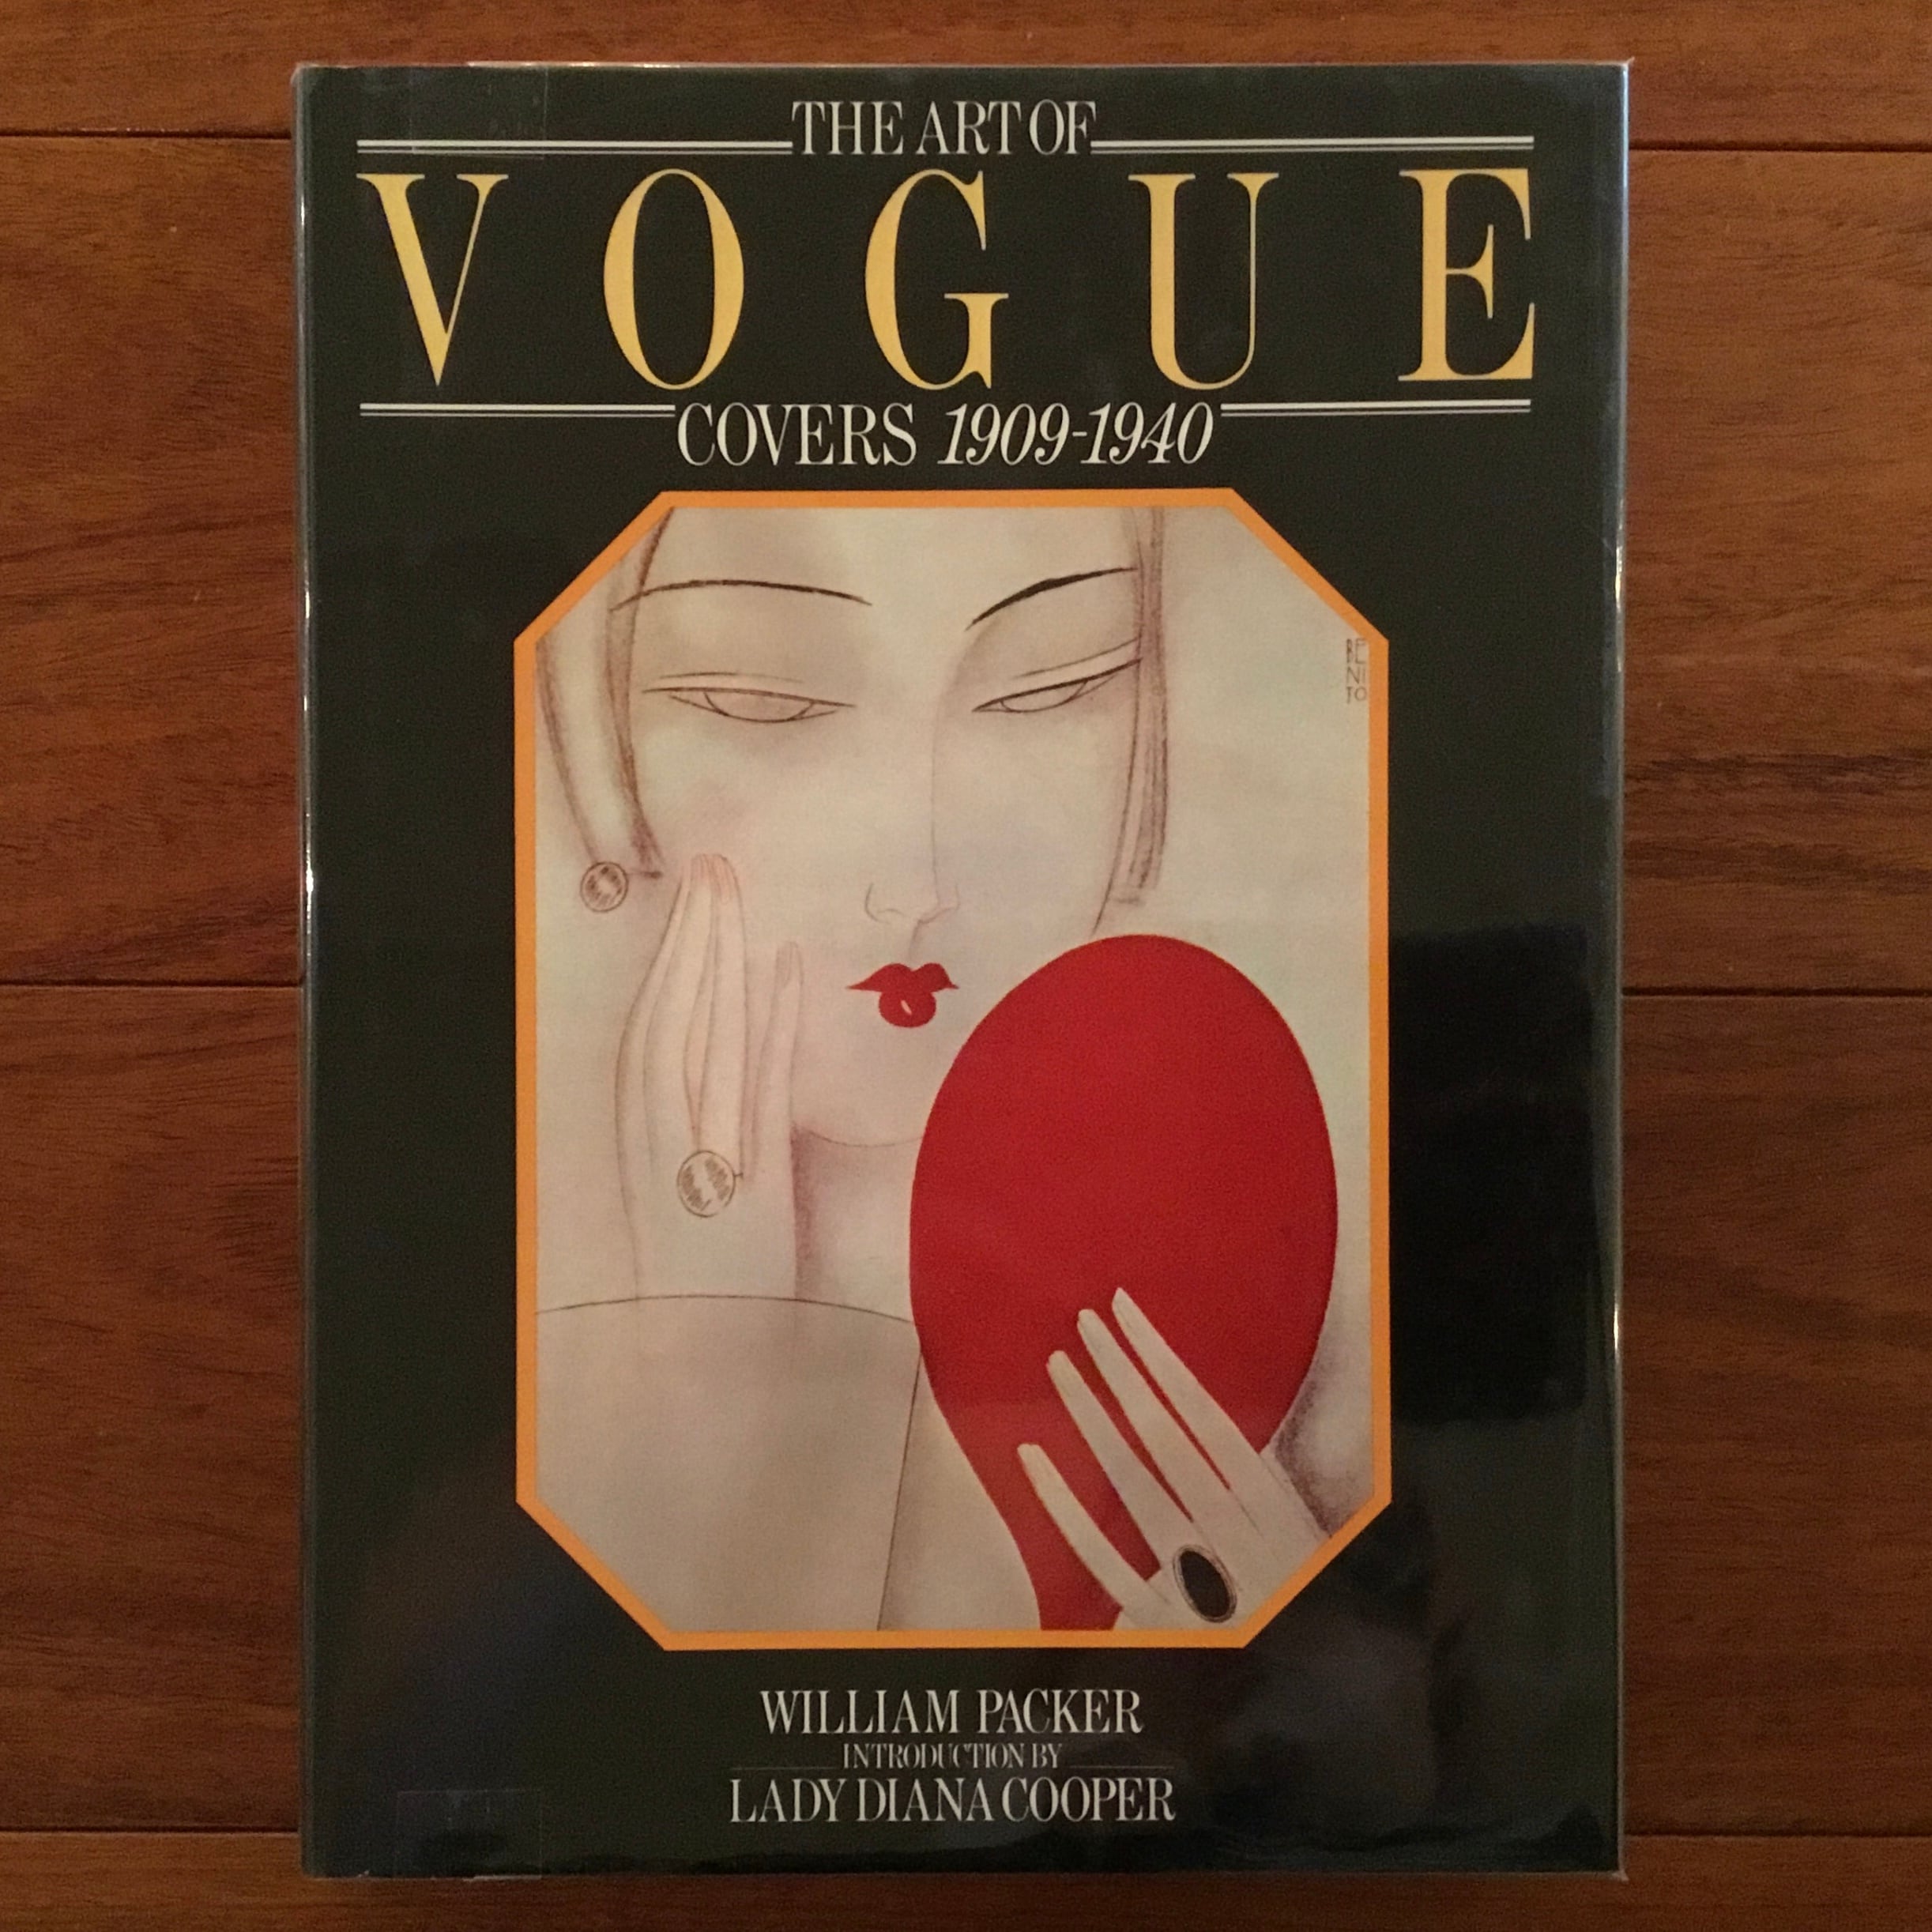 The Art of Vogue Covers 1909-1940 | Flying Books powered by BASE